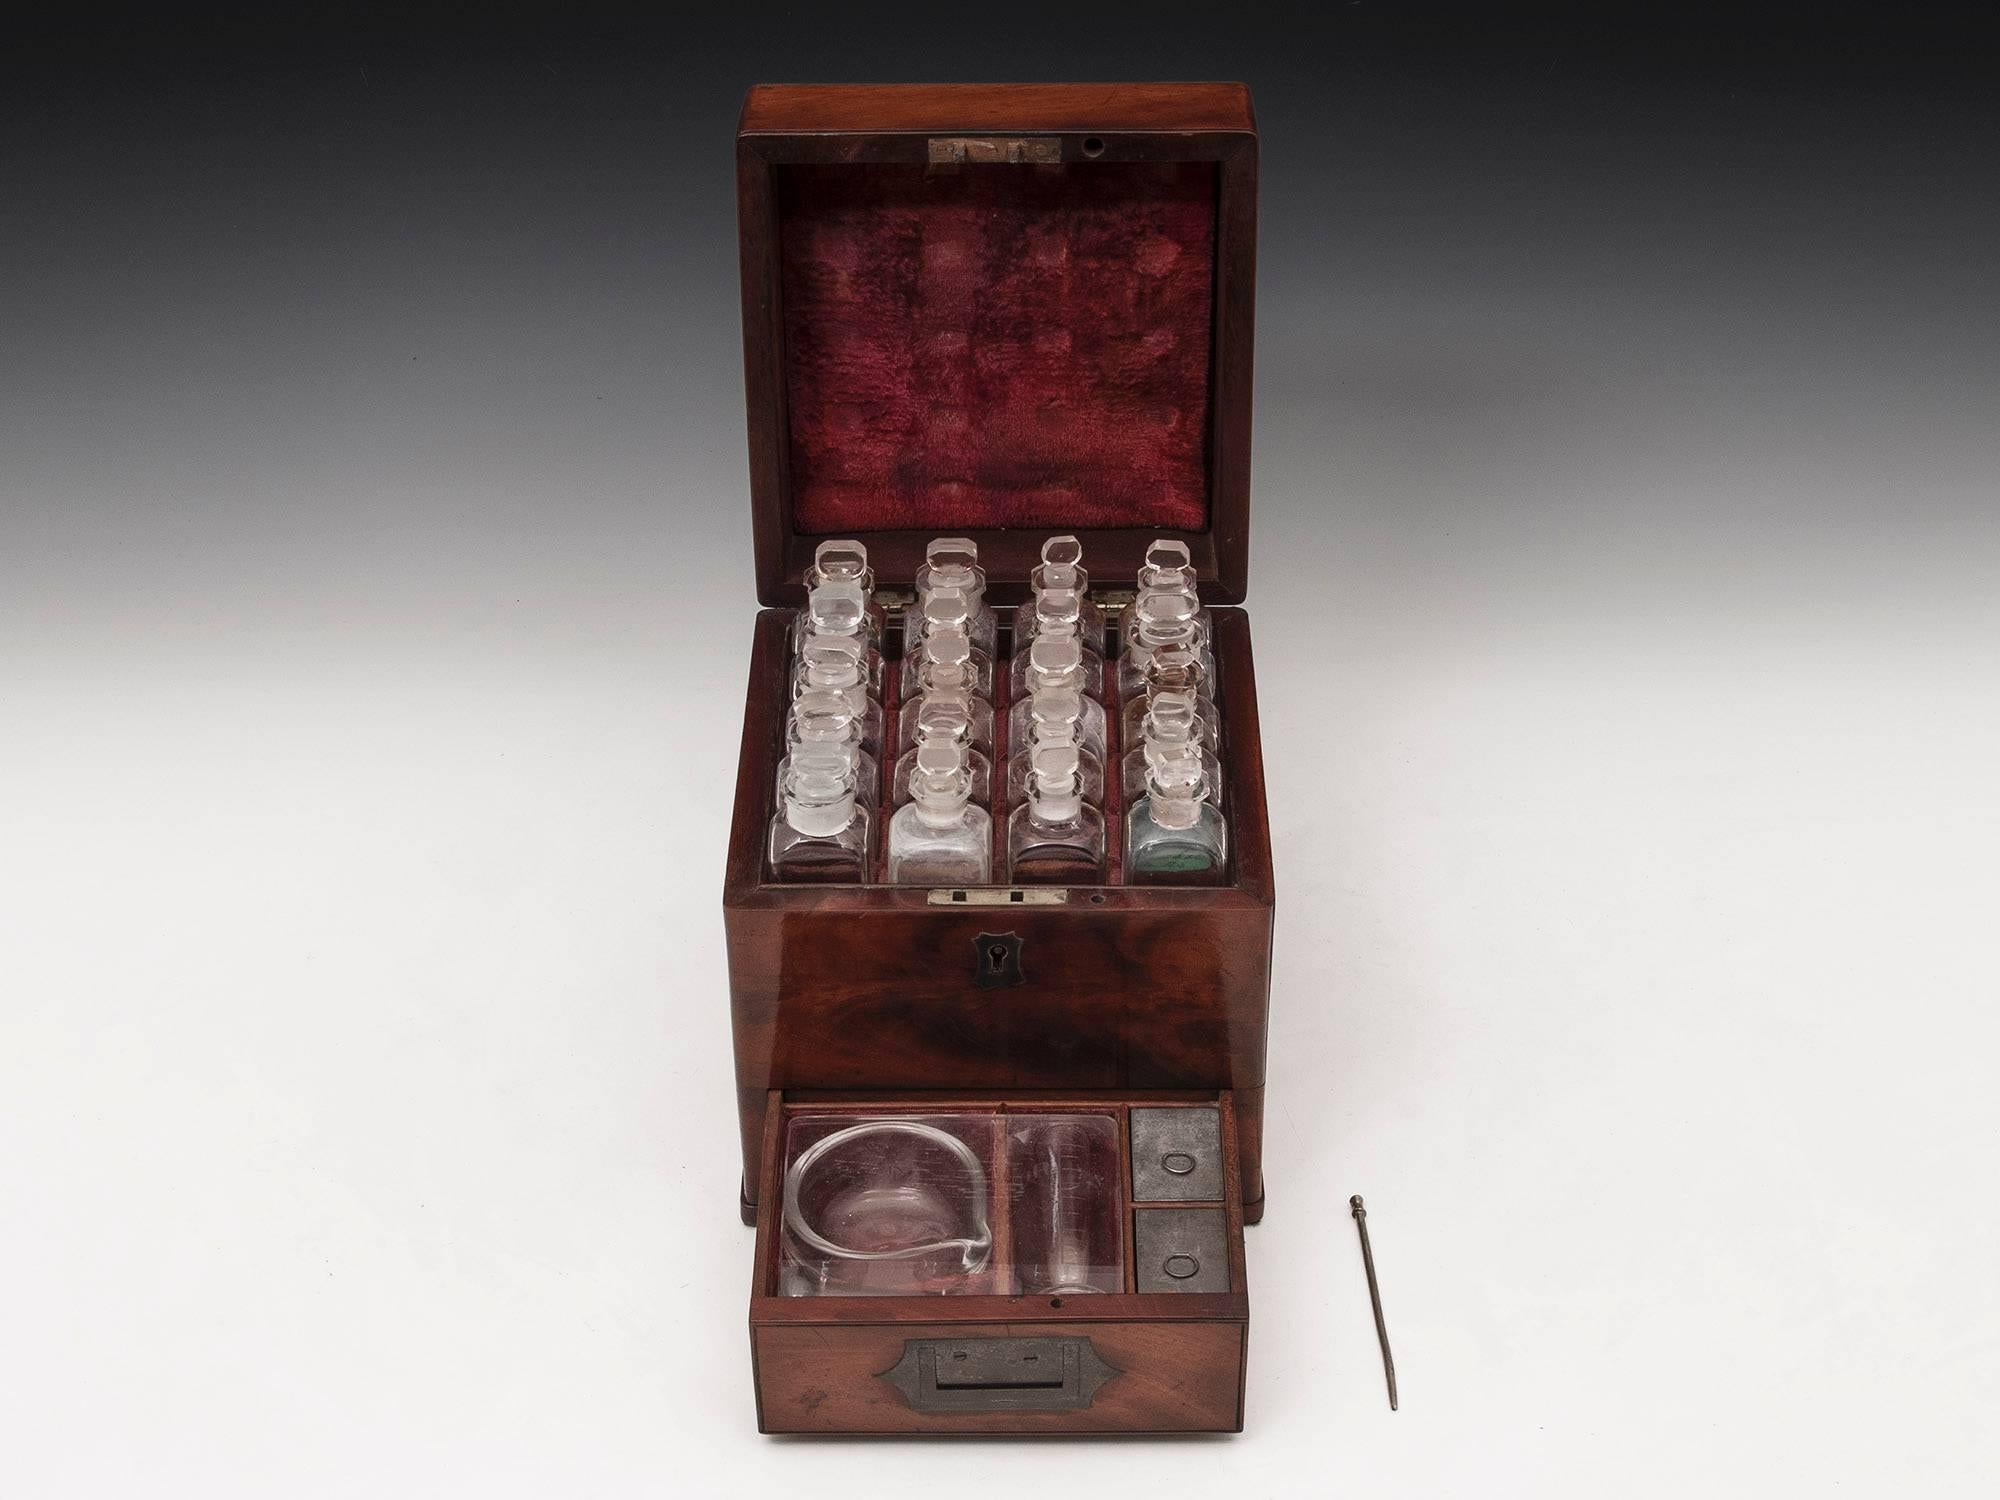 Apothecary box made of solid mahogany with flush fitting campaign handles, contains all of its original contents and the wooden case has superb patination and colour. 

The interior is lined in red velvet and contains twenty glass bottles complete